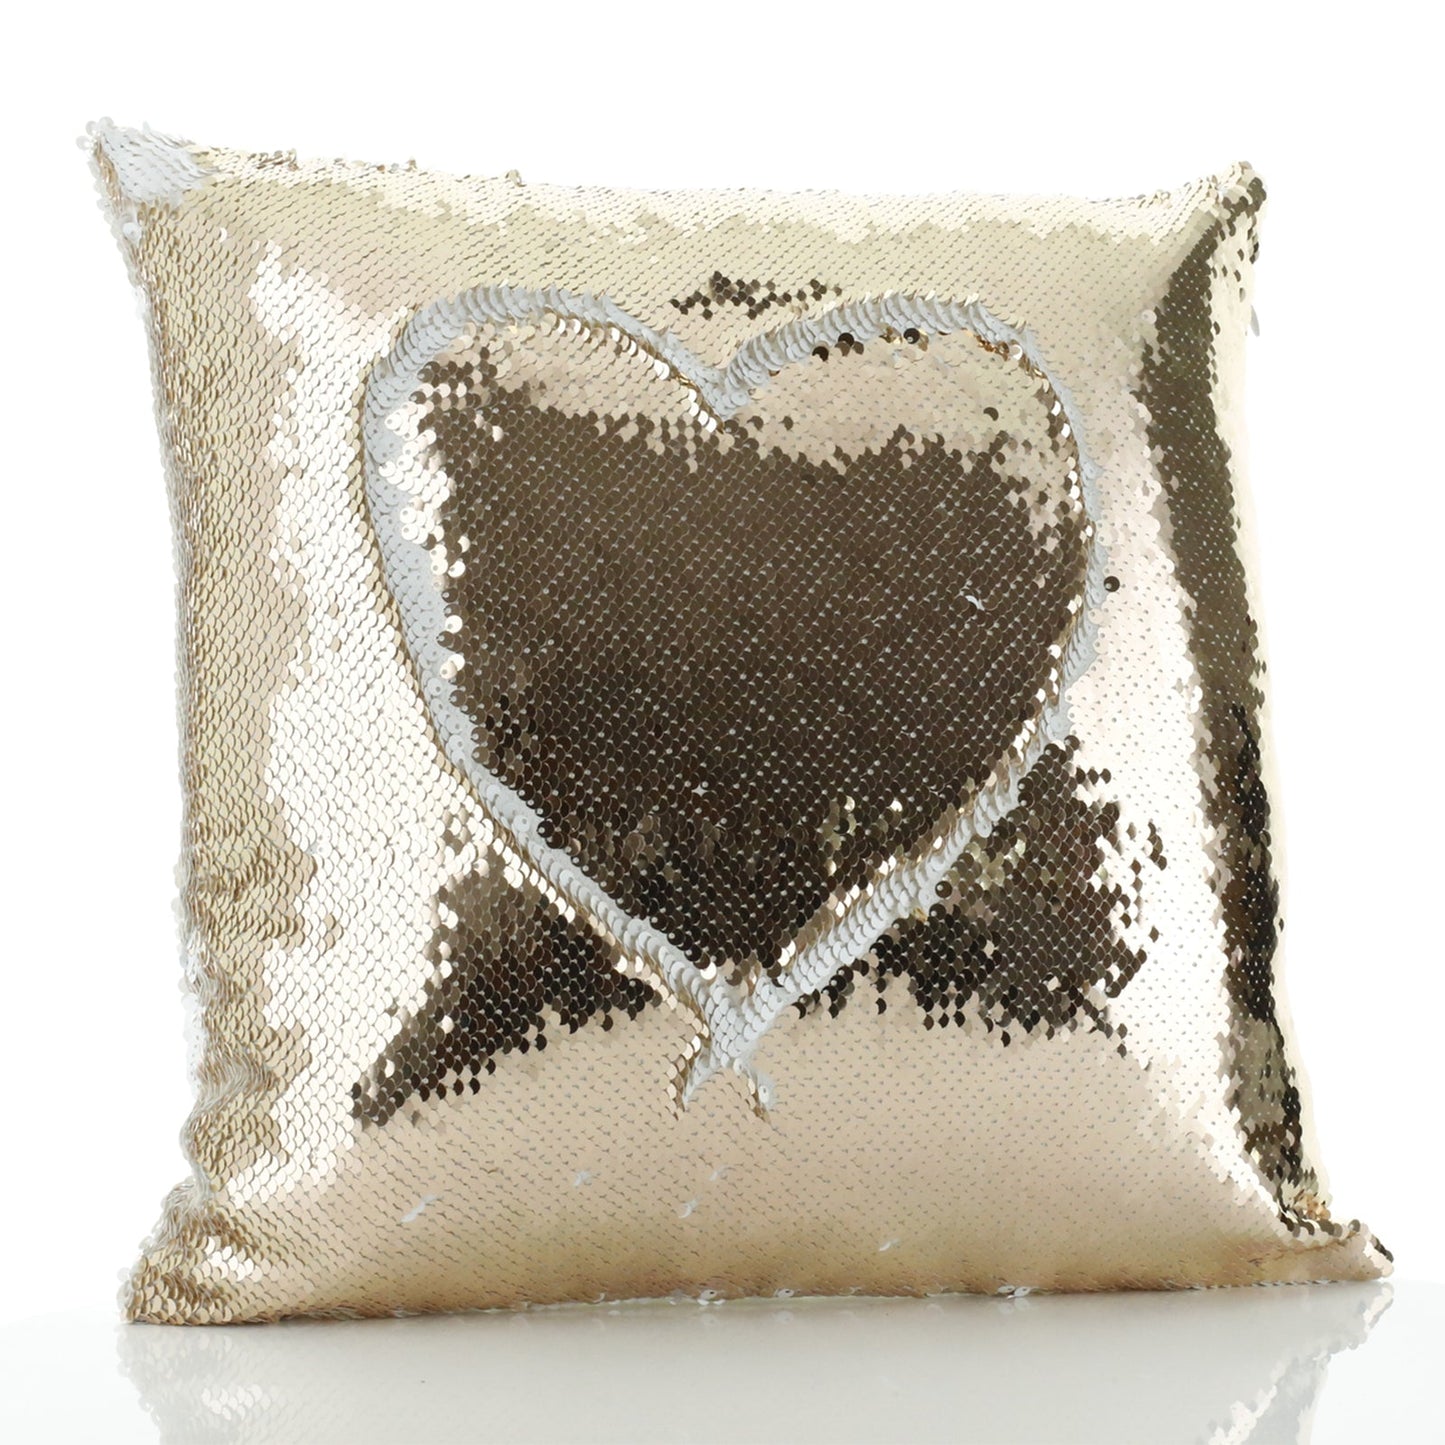 Personalised Sequin Cushion with Welcoming Text and Climbing Mum and Baby Koalas